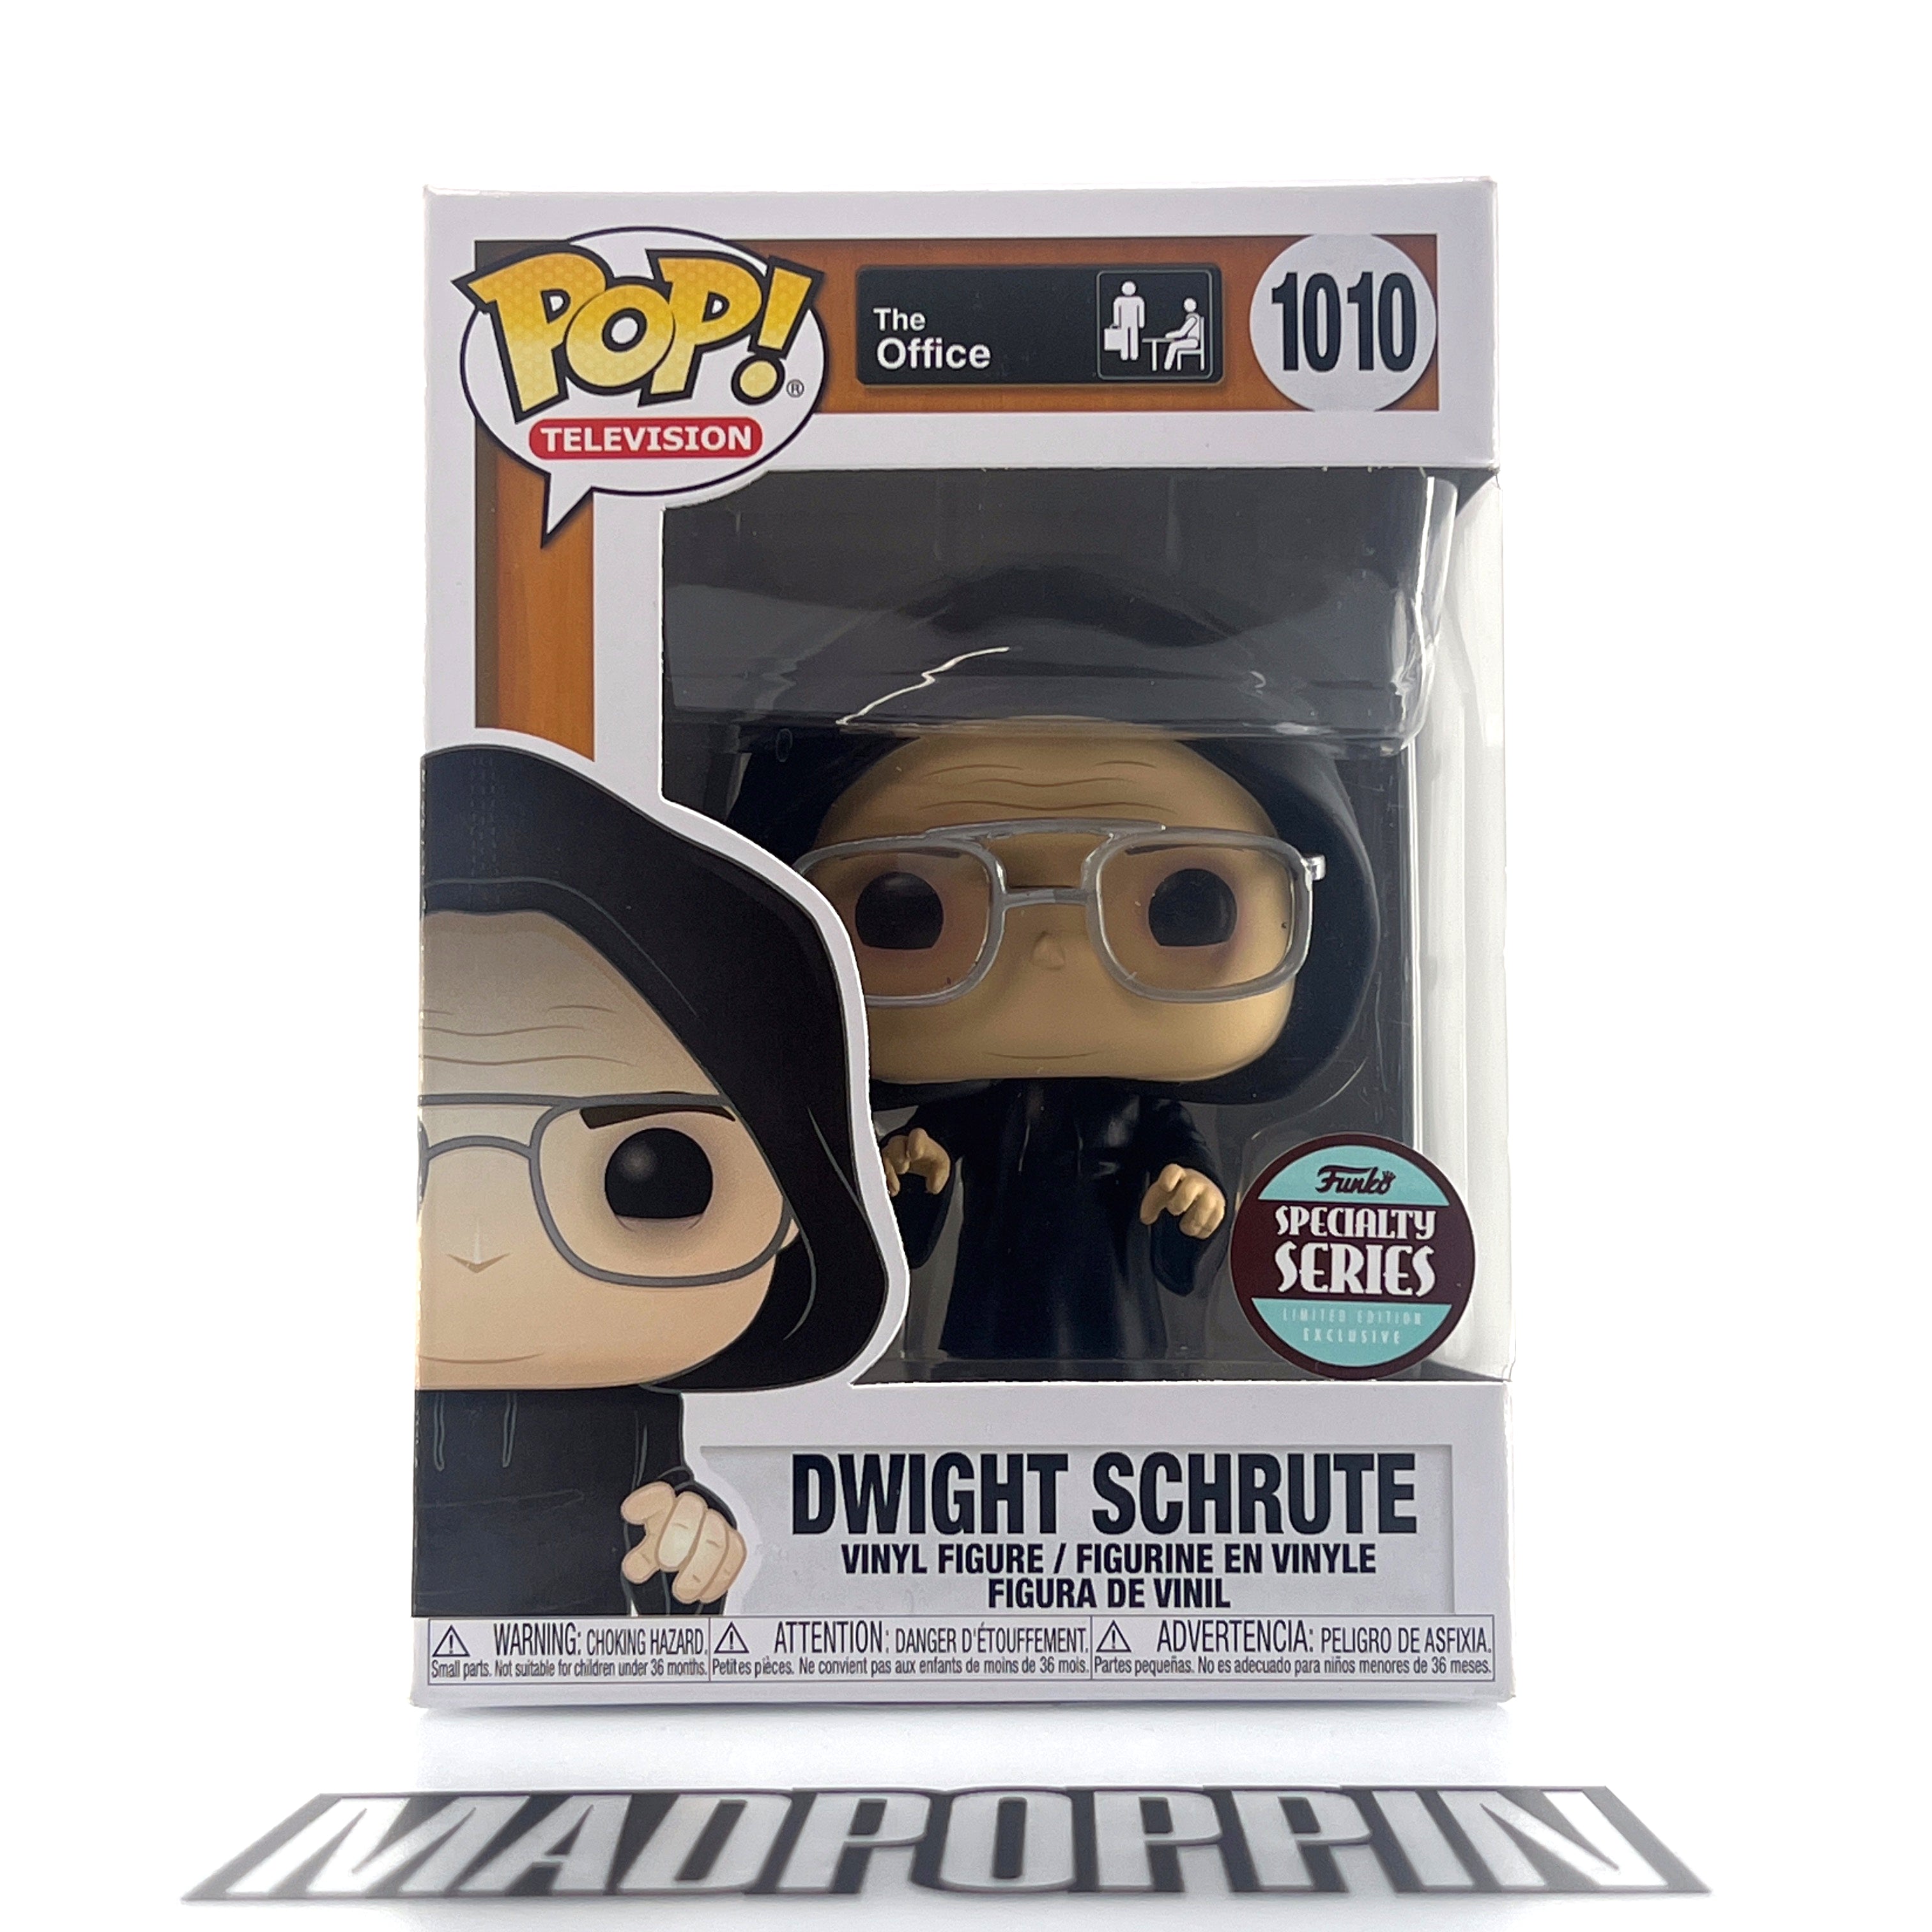 Funko Pop Television The Office Dwight Schrute Dark Lord Specialty Series #1010